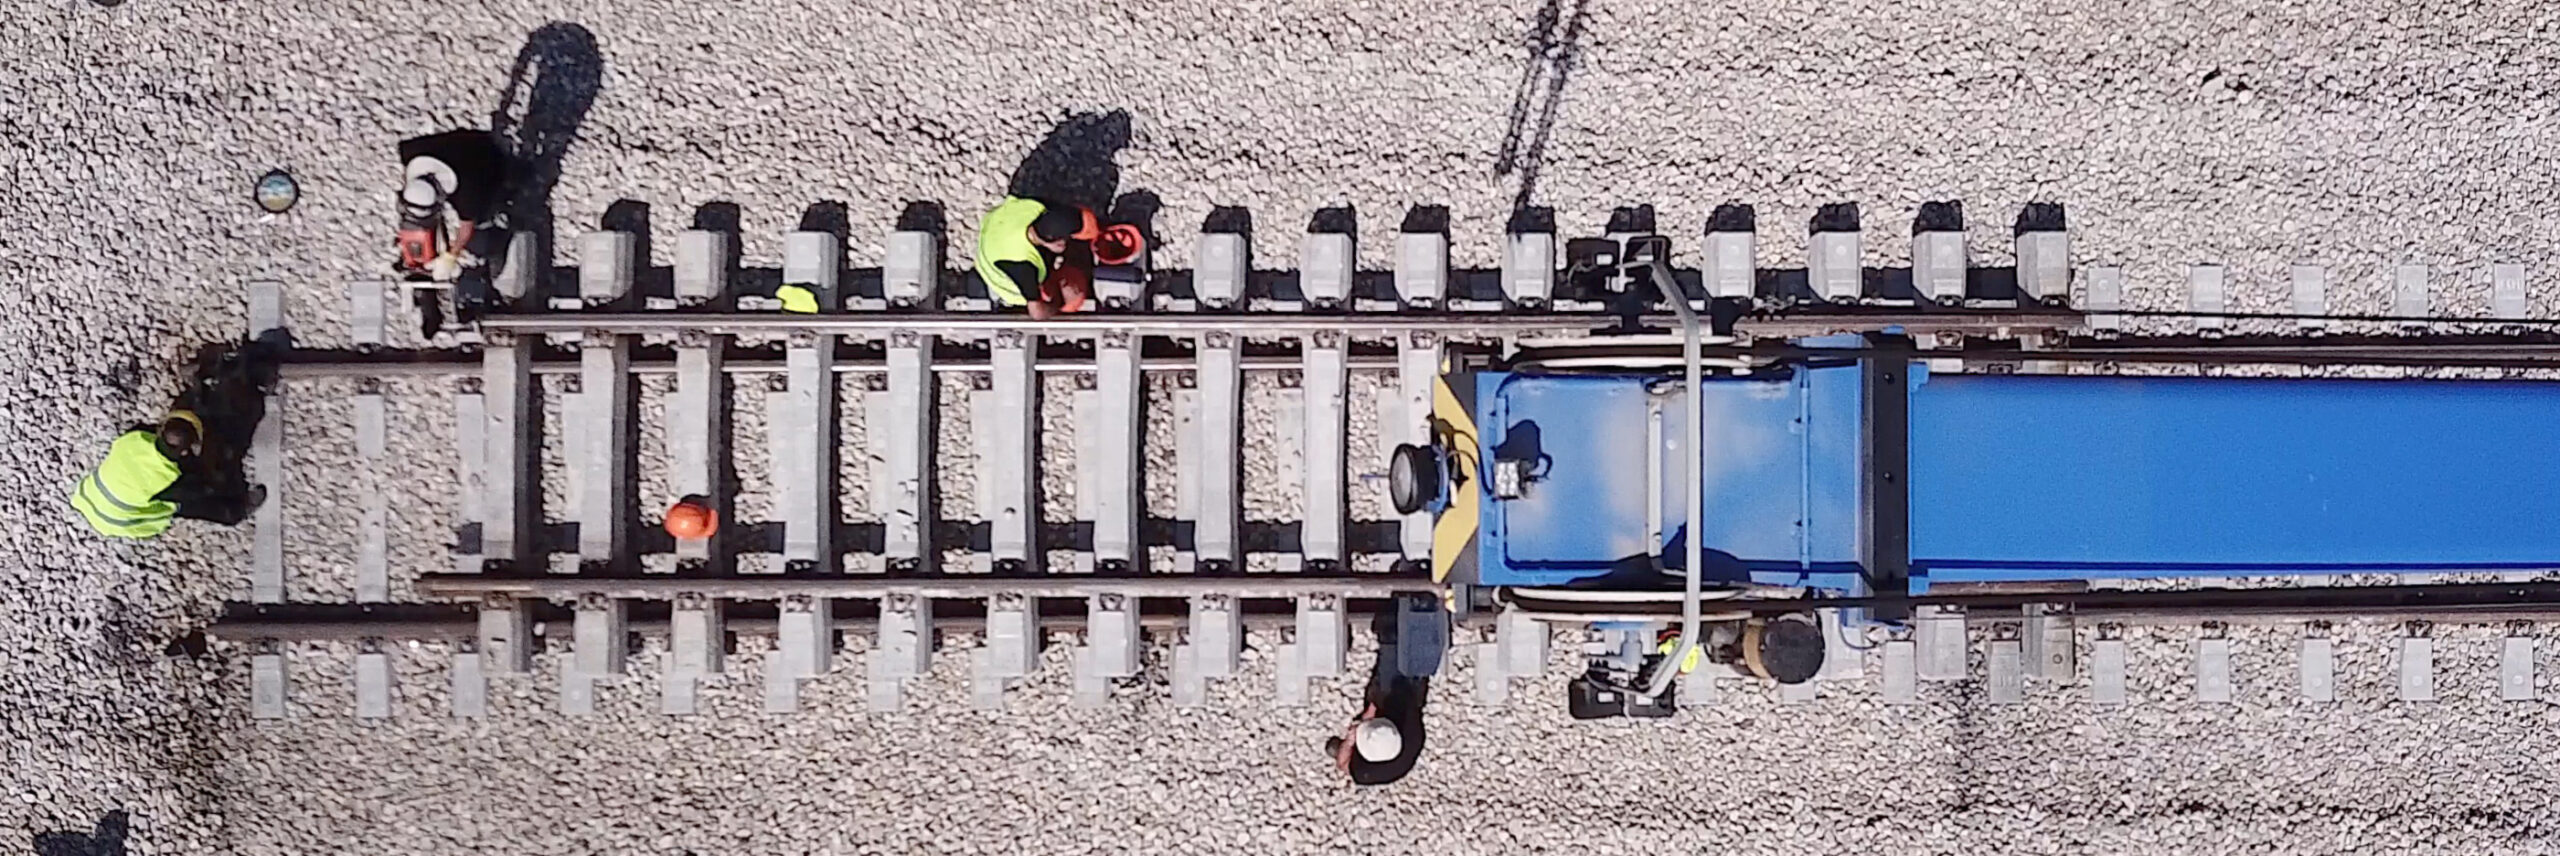 Bailey Brand Consulting - North American Rail Solutions Construction site showing 4 different people working on laying the rails to make up a new train track